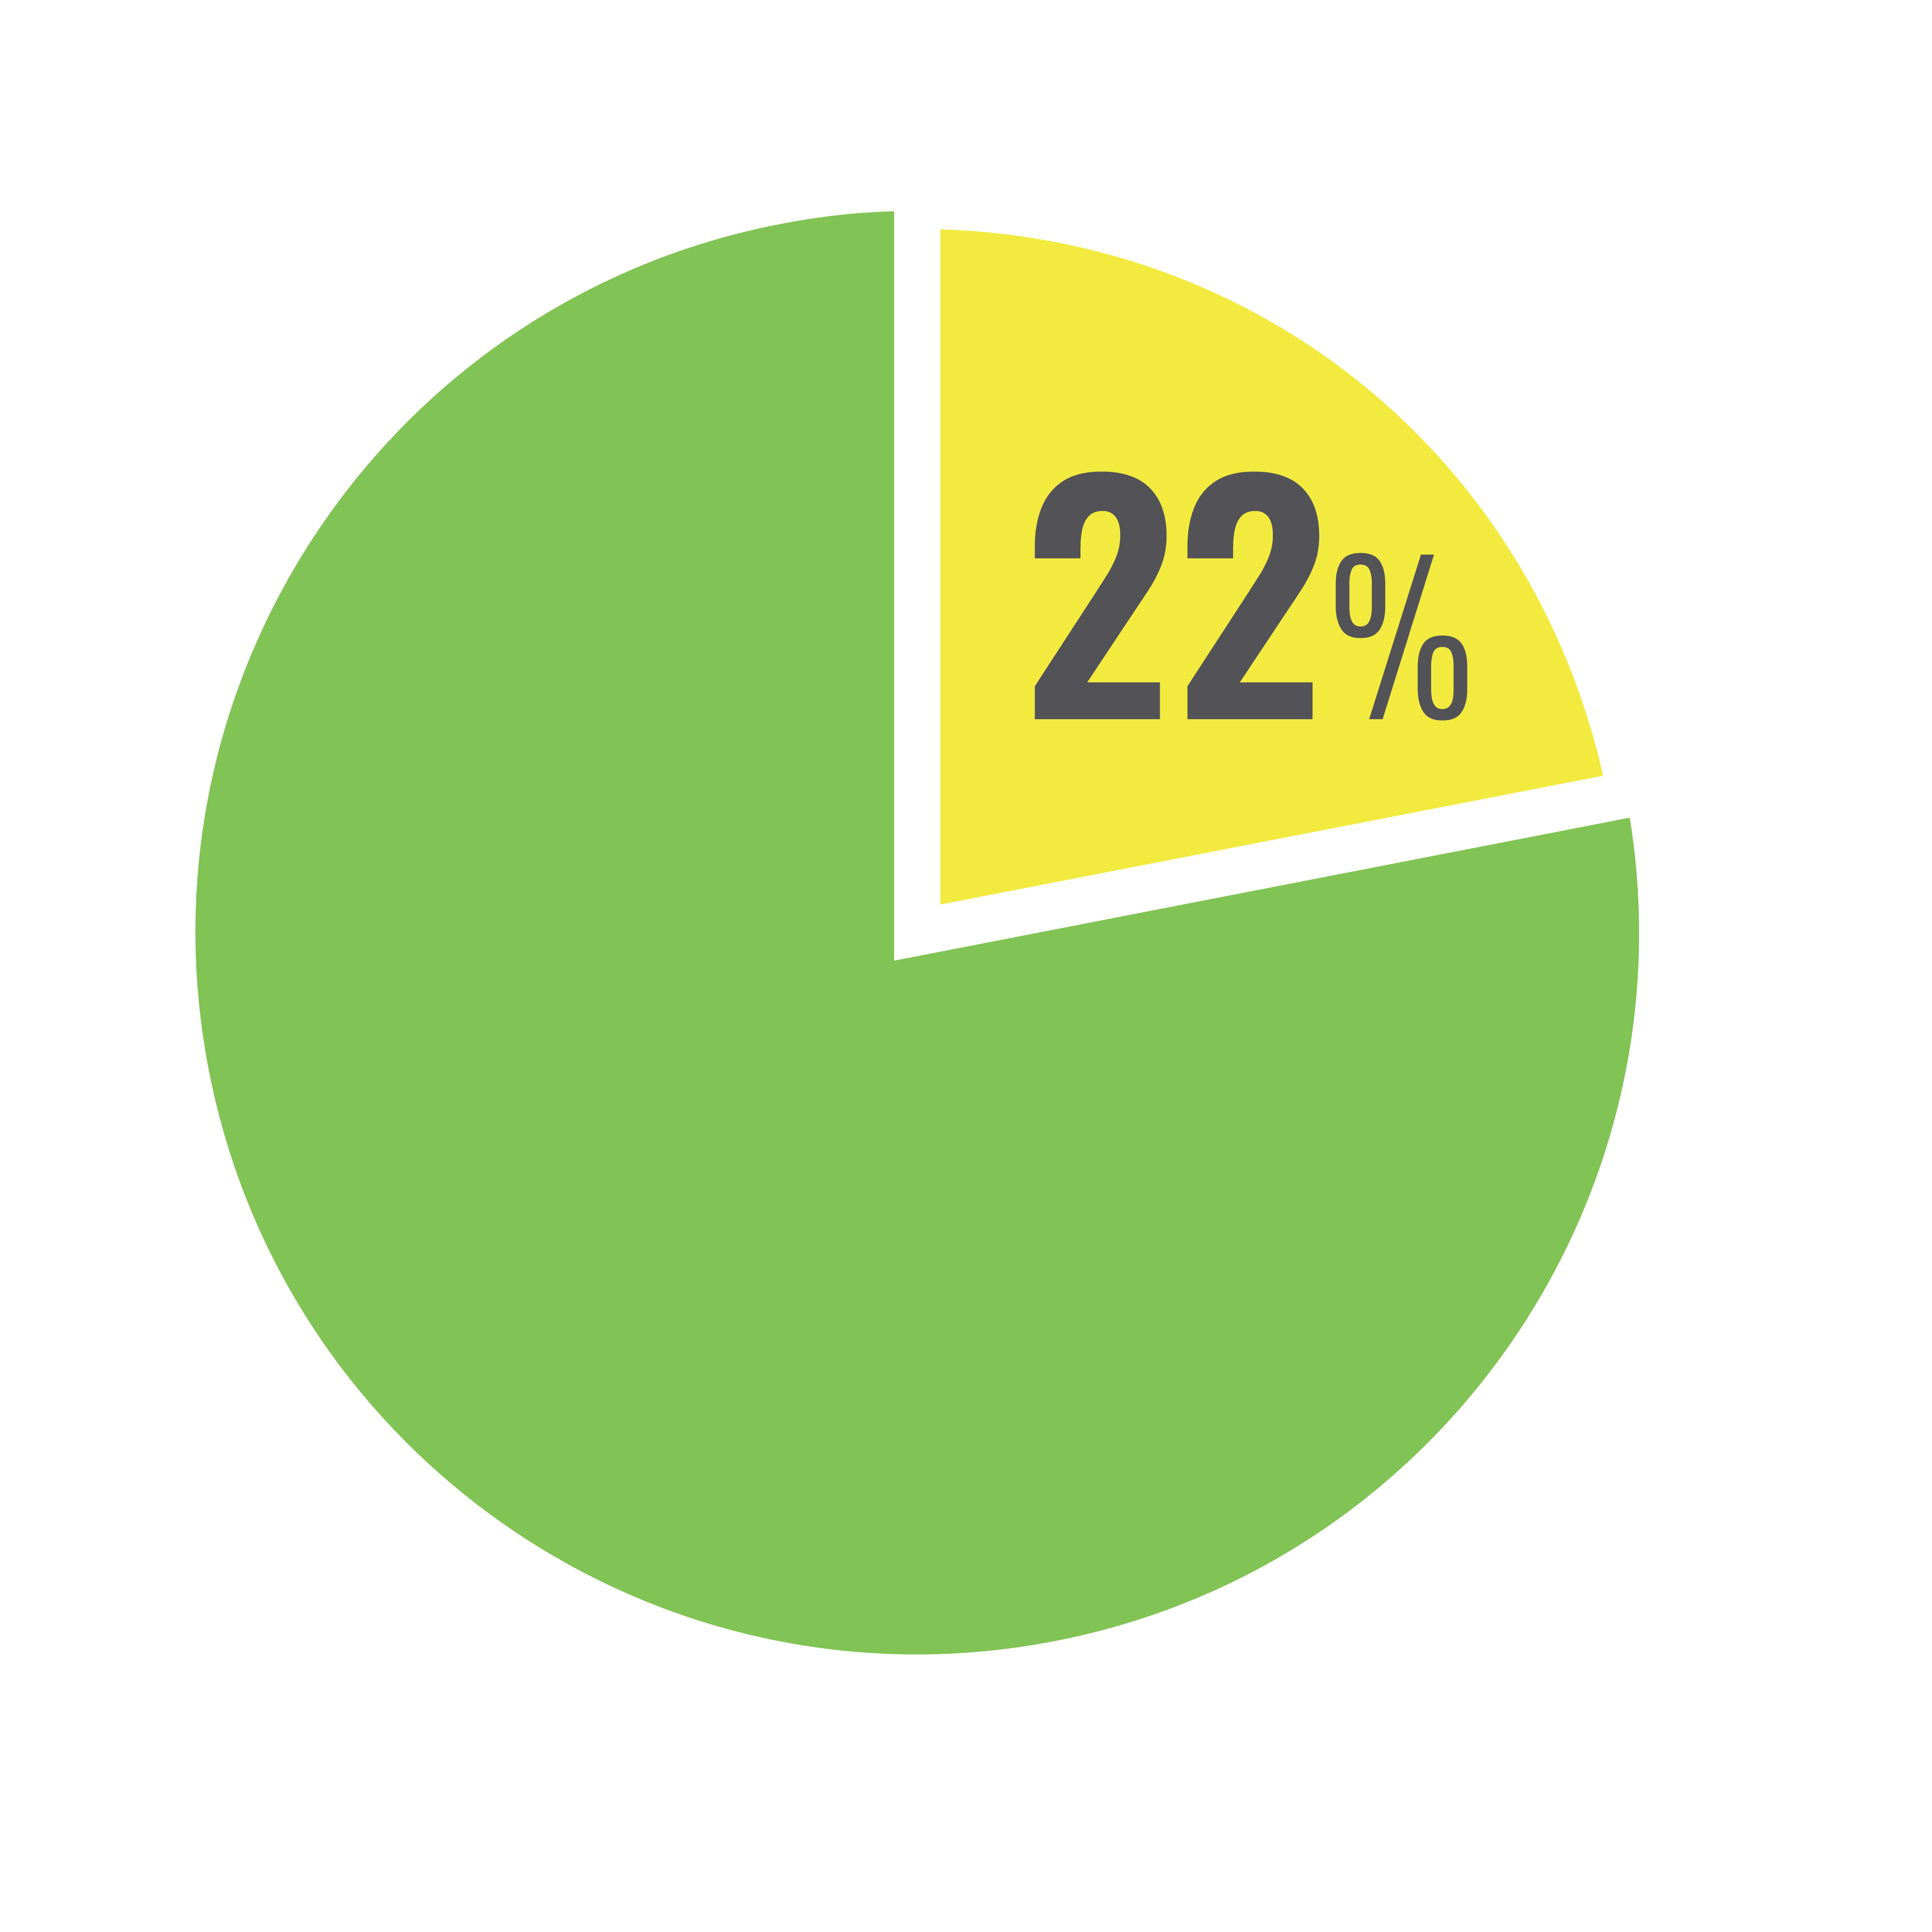 Pie chart showing 22% of homes tested have elevate levels of particulate matter (PM10)